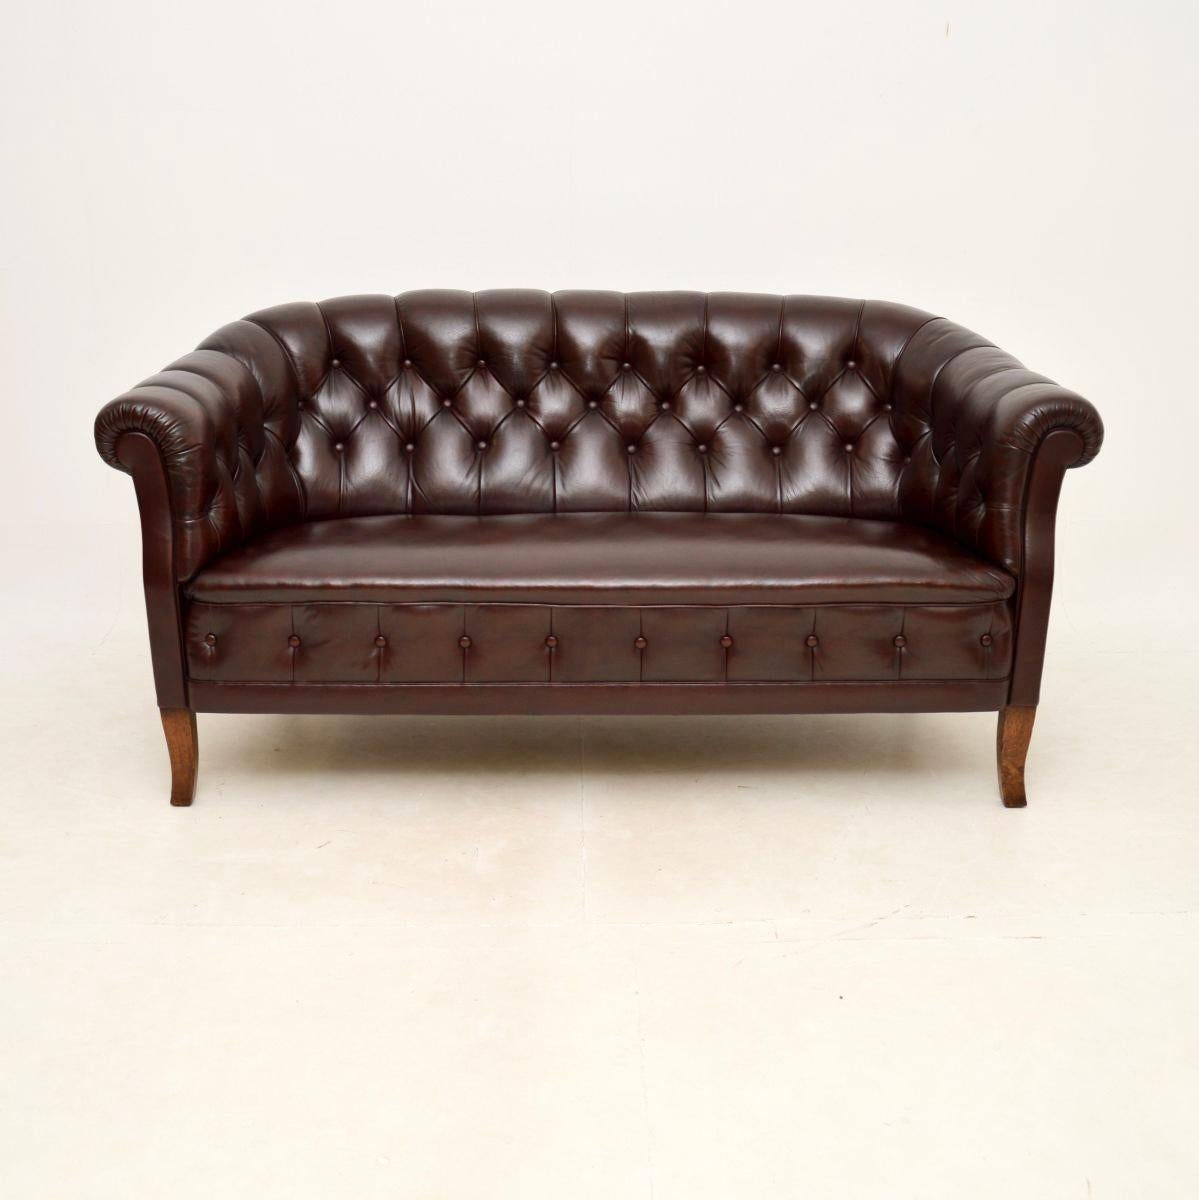 An absolutely beautiful antique Swedish leather sofa. We have recently imported this from Sweden, it dates from around the 1900-1920 period.

The quality is superb and it is very comfortable. The seat is well sprung, the frame sits on solid oak